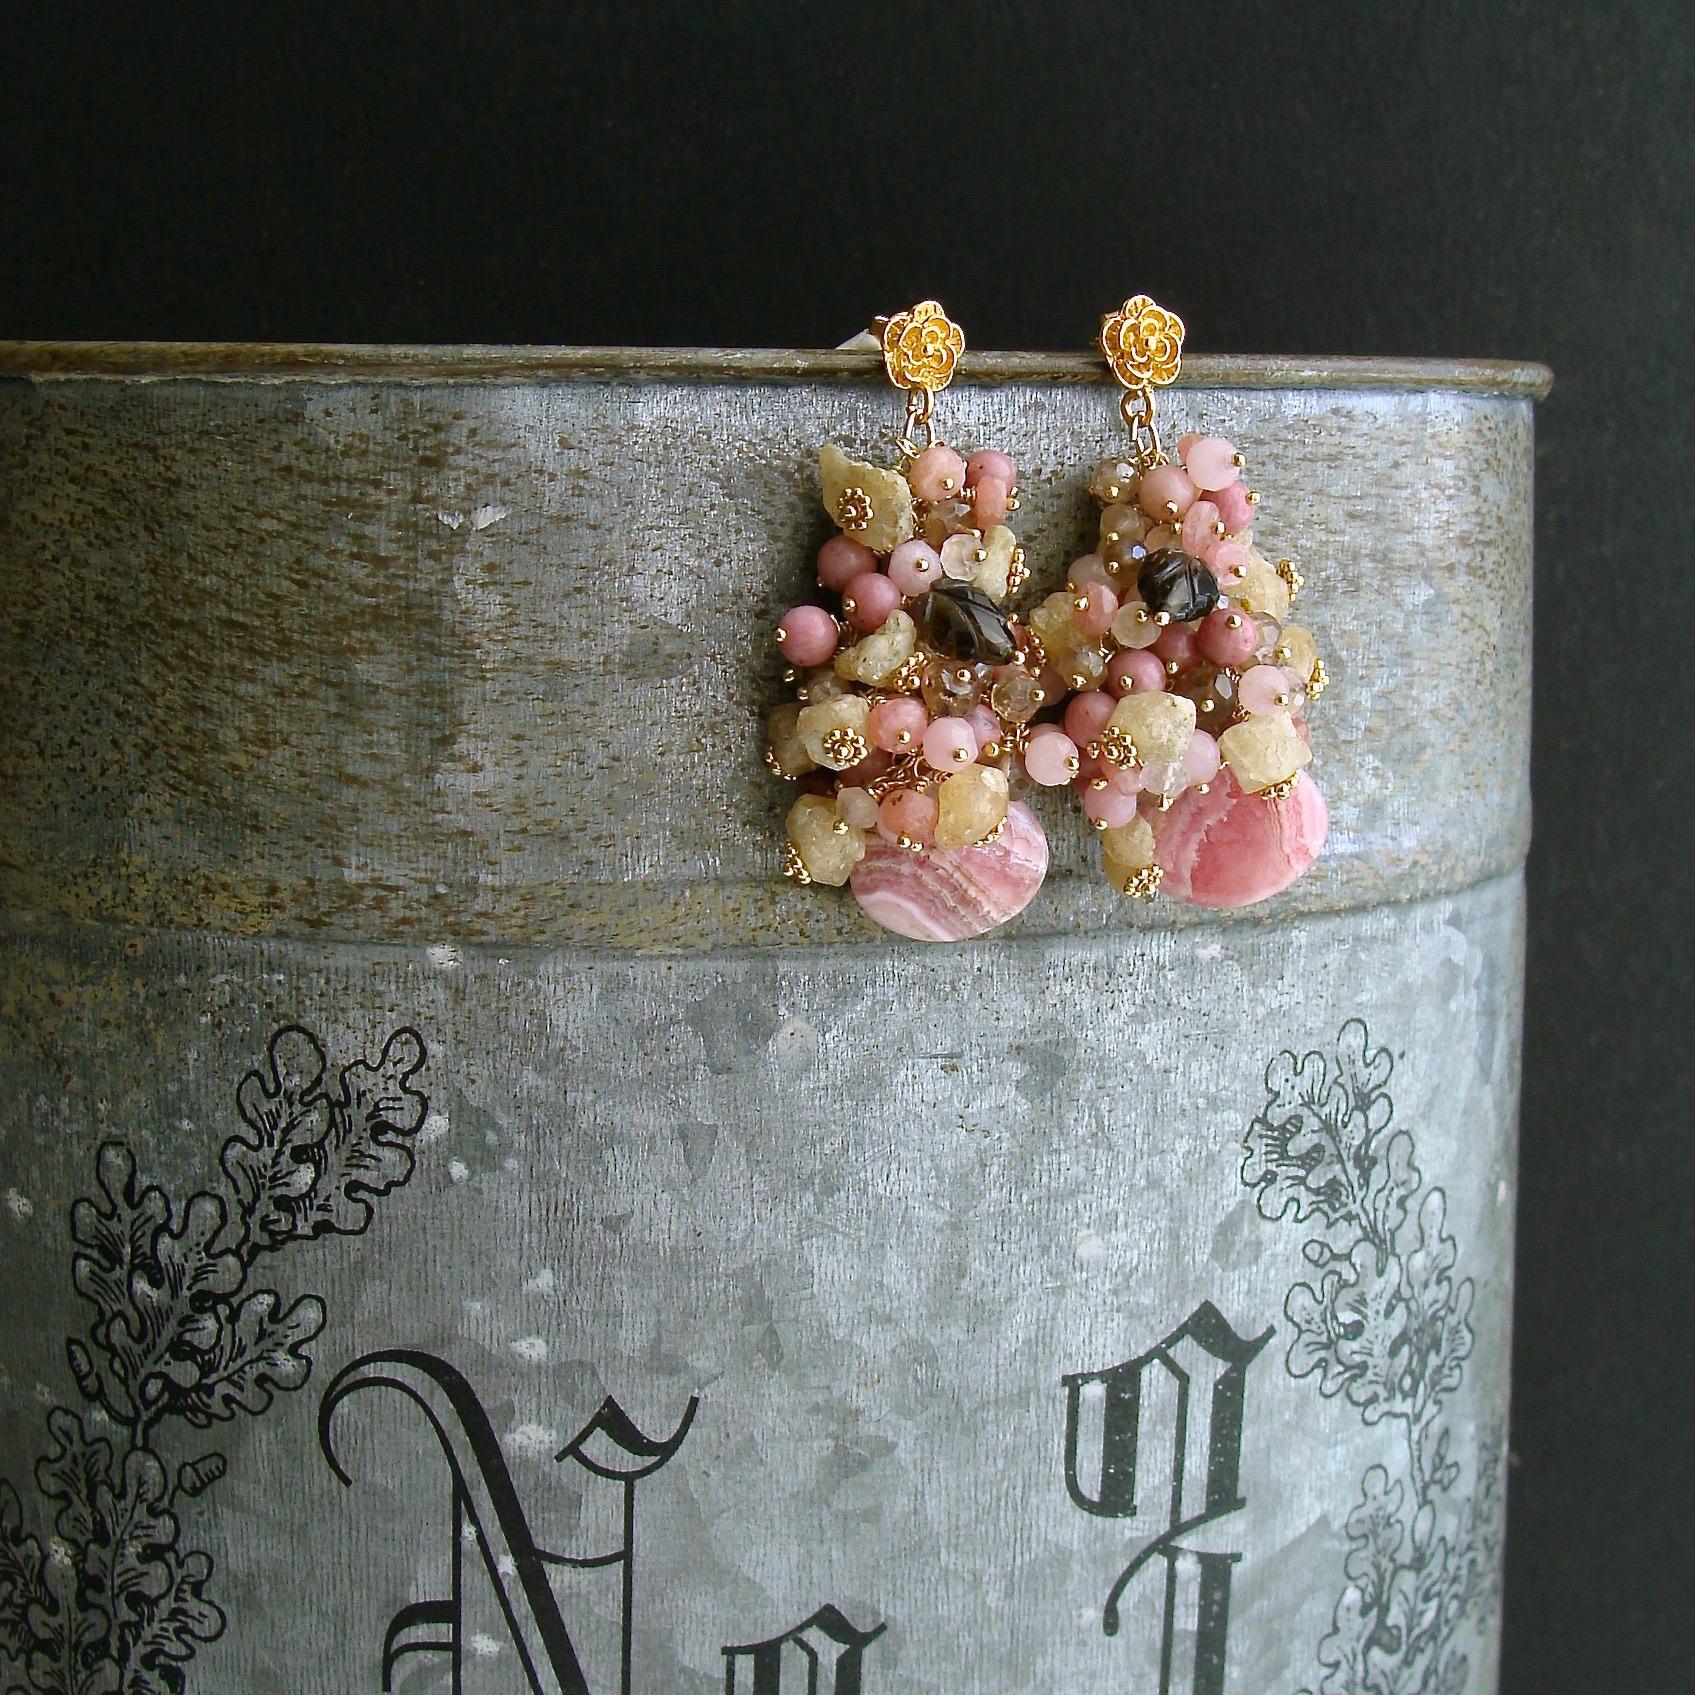 Fleurs XIX Earrings.

Unique Missoni-style striped rhodochrosite briolettes in honeysuckle pink, bamboo, coffee liqueur and nougat colors are juxtaposed with generous clusters of champagne topaz, rhodonite, pink jade, rose quartz, raw  Herkimer